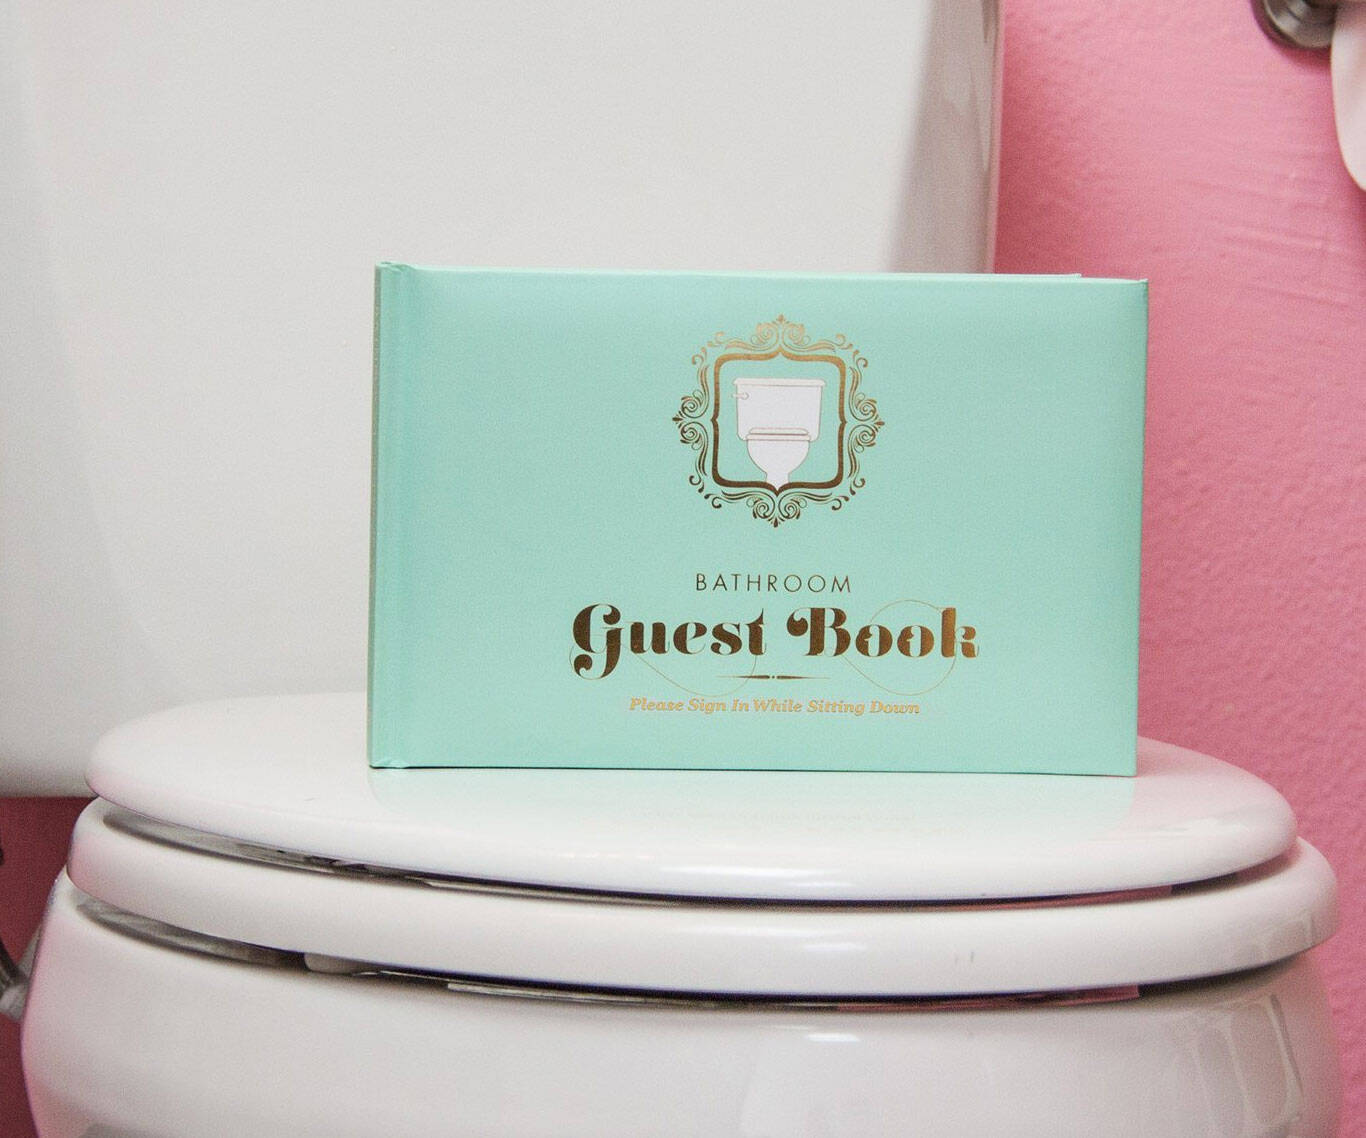 The Bathroom Guest Book - coolthings.us